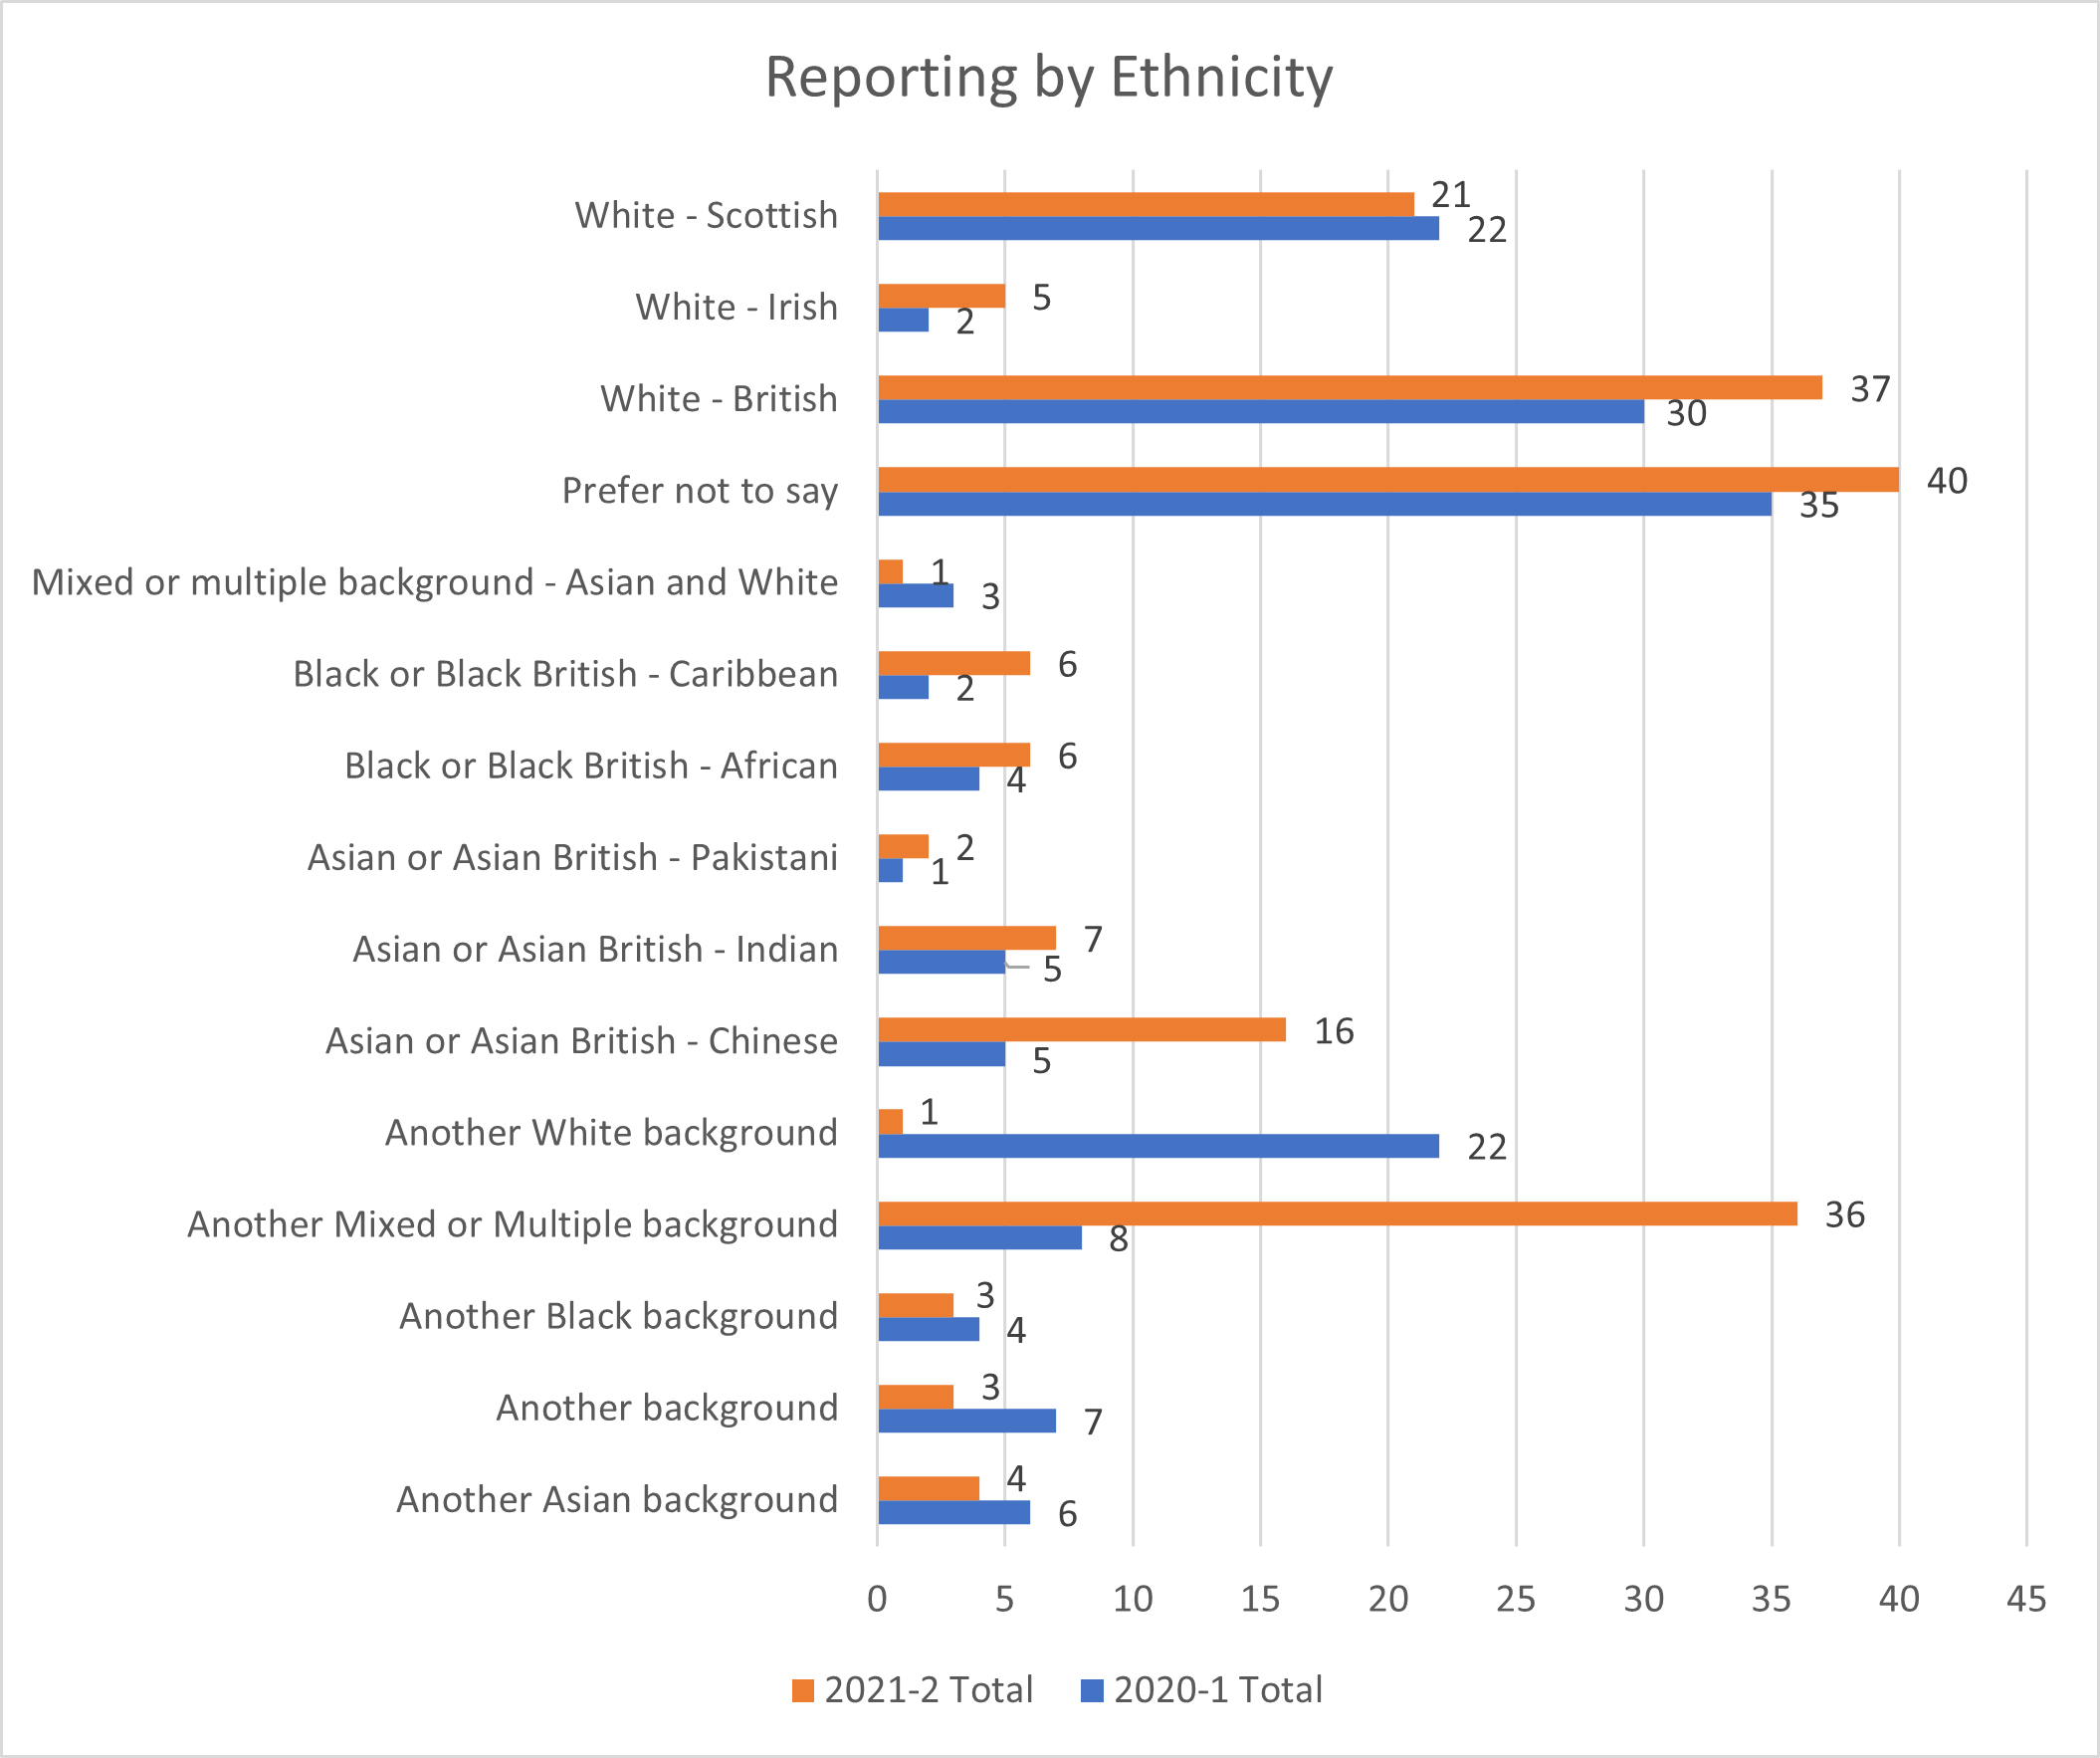 Data on reporting by ethnicity